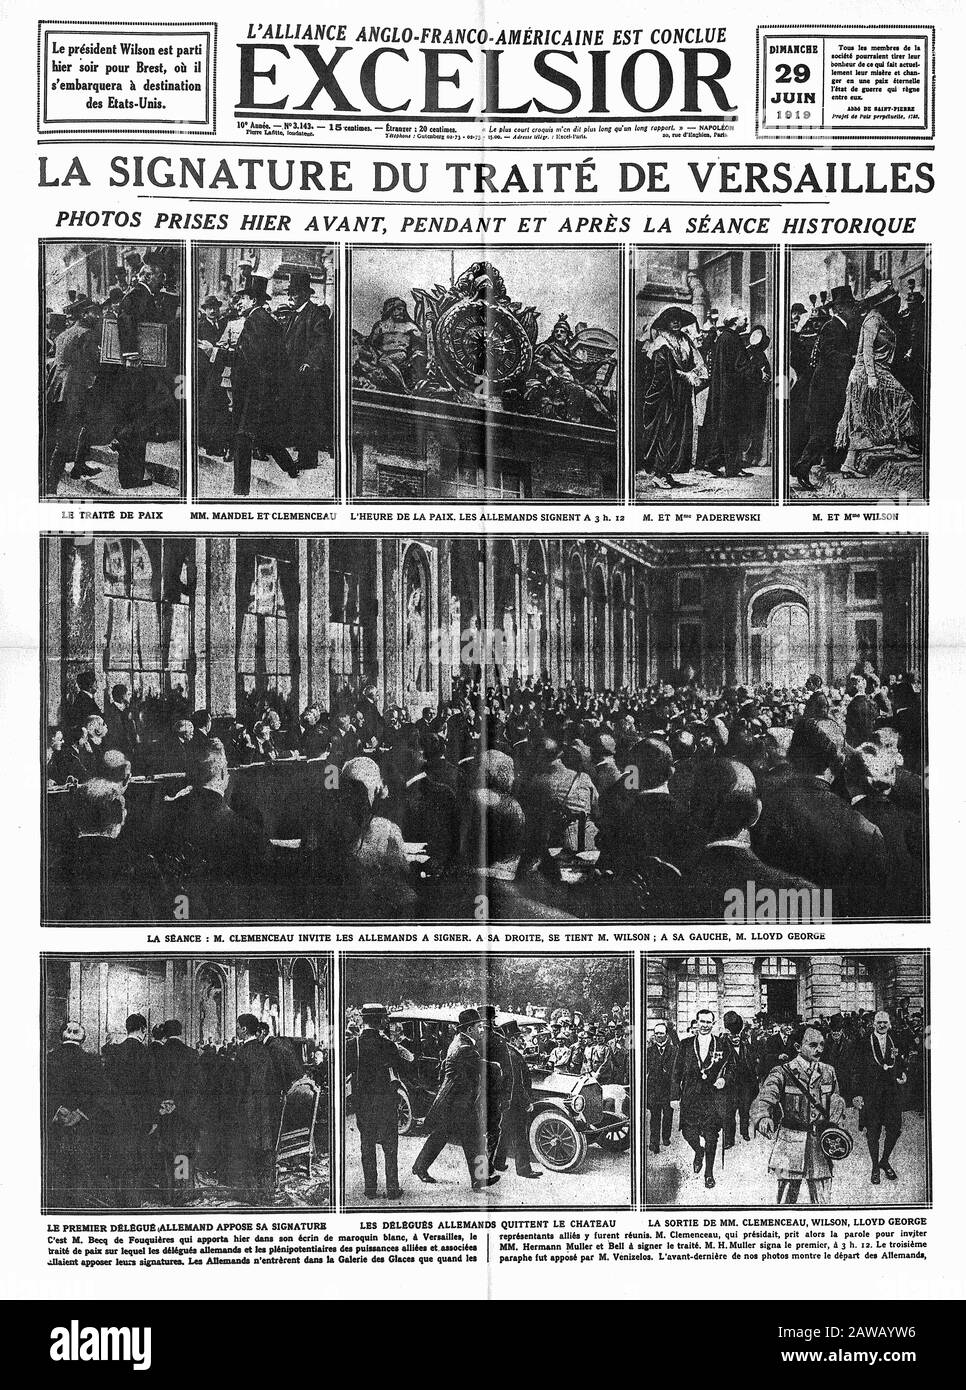 1919 , 29 june , FRANCE : The french newspaper EXCELSIOR with the news on the Treaty of Versailles of 28 June 1919,  at the end of World War I  - ITAL Stock Photo